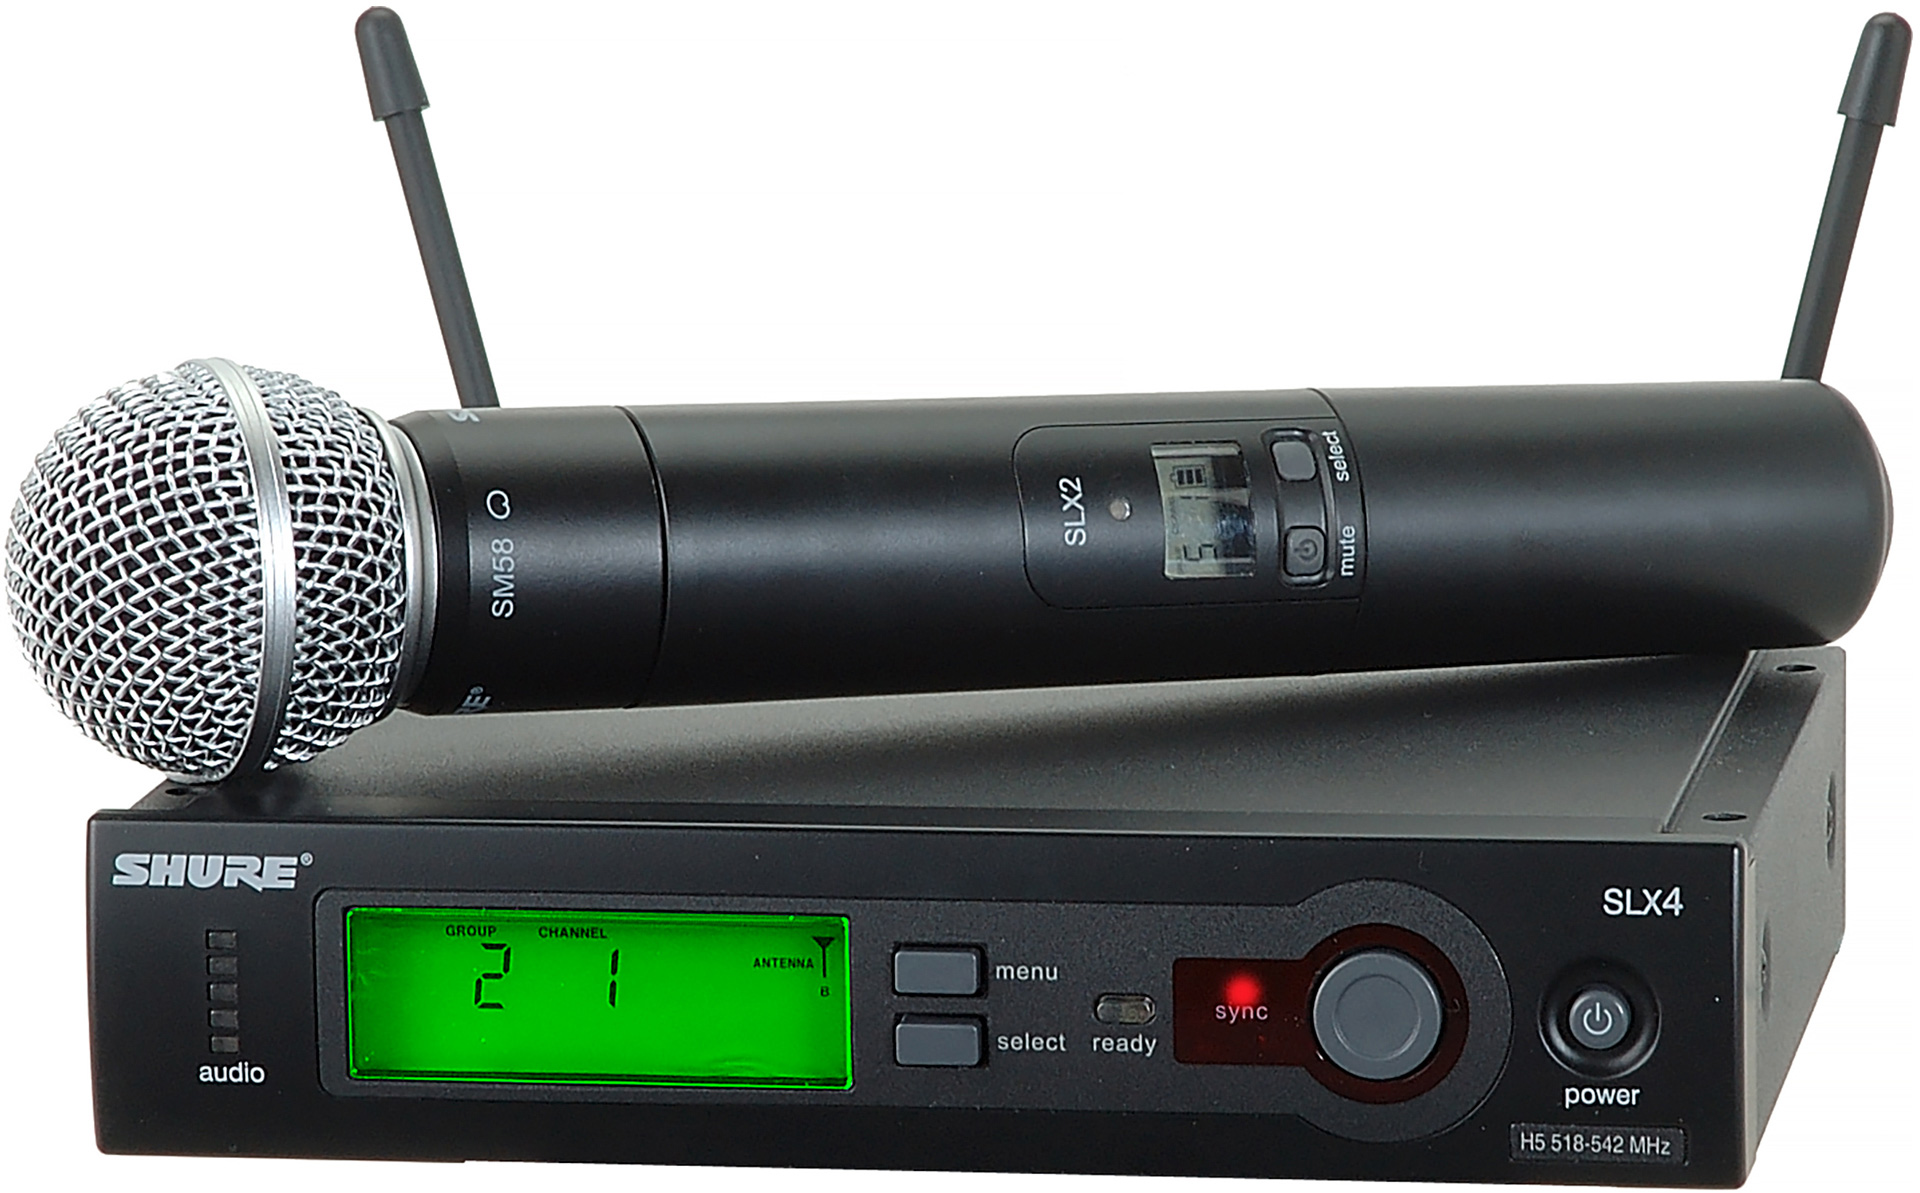 arve perforere Ring tilbage Shure SLX Wireless System SM58 Handheld Mic - G4 470-494 MHz